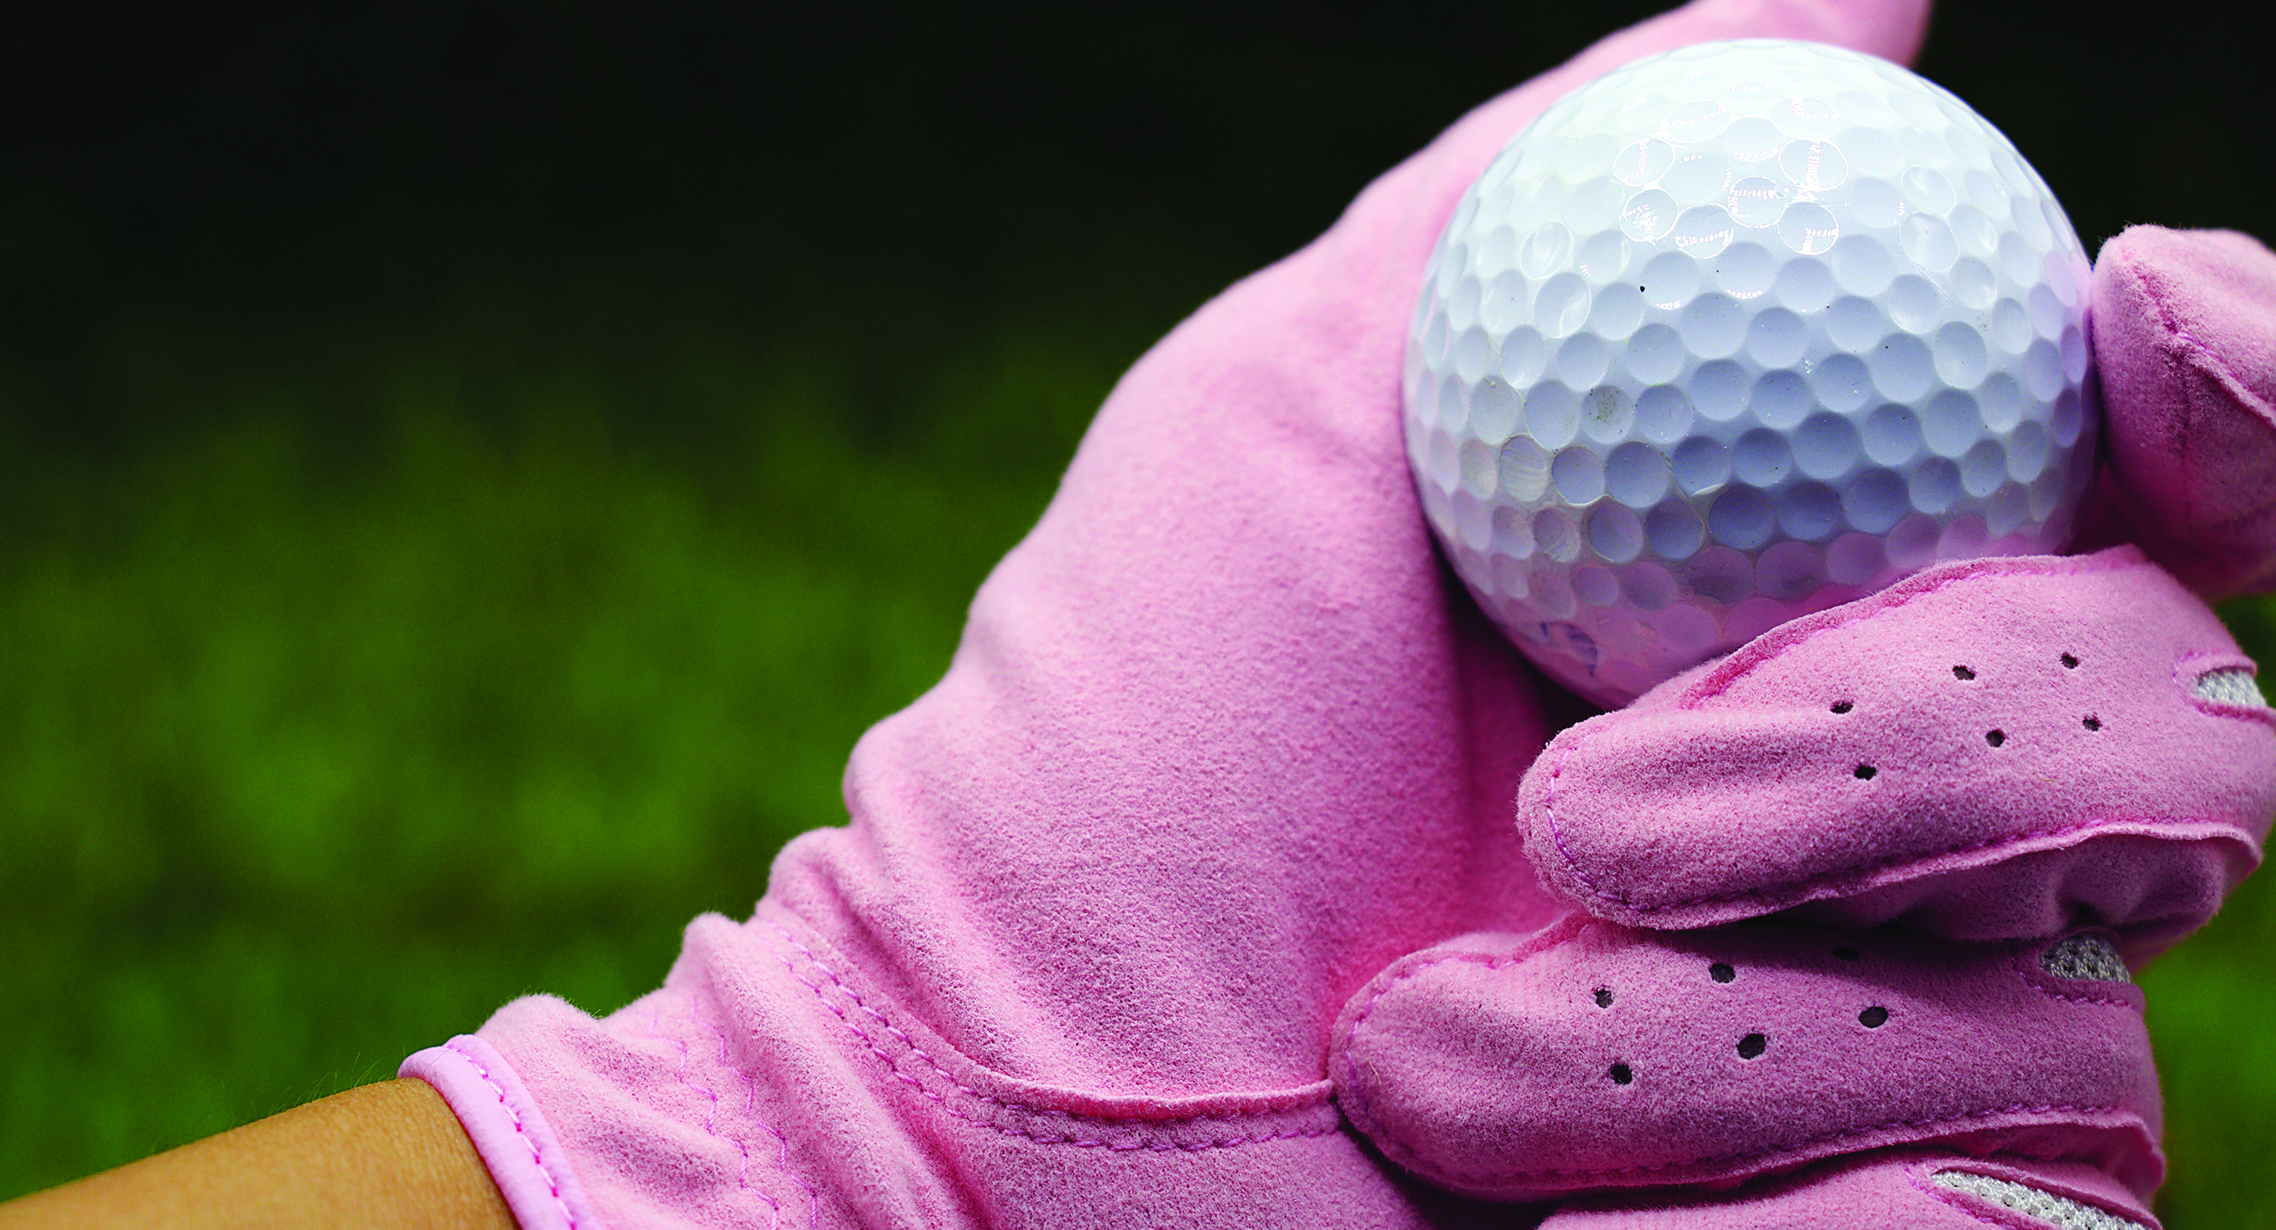 lady wearing pink golf gloves and holding golfball